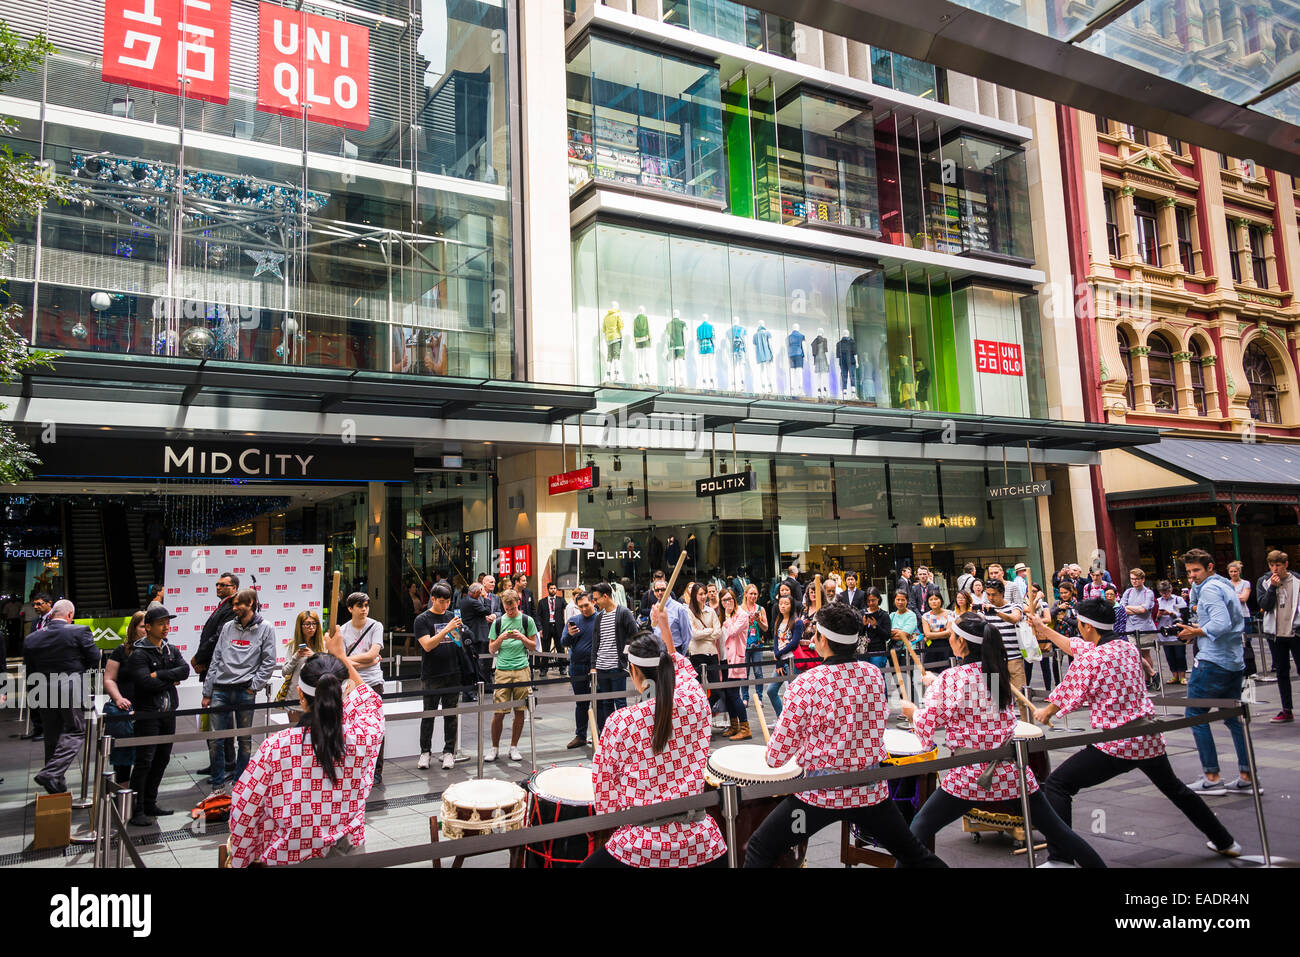 Uniqlo to open in Brisbanes Queen Street Mall  Retail in Asia